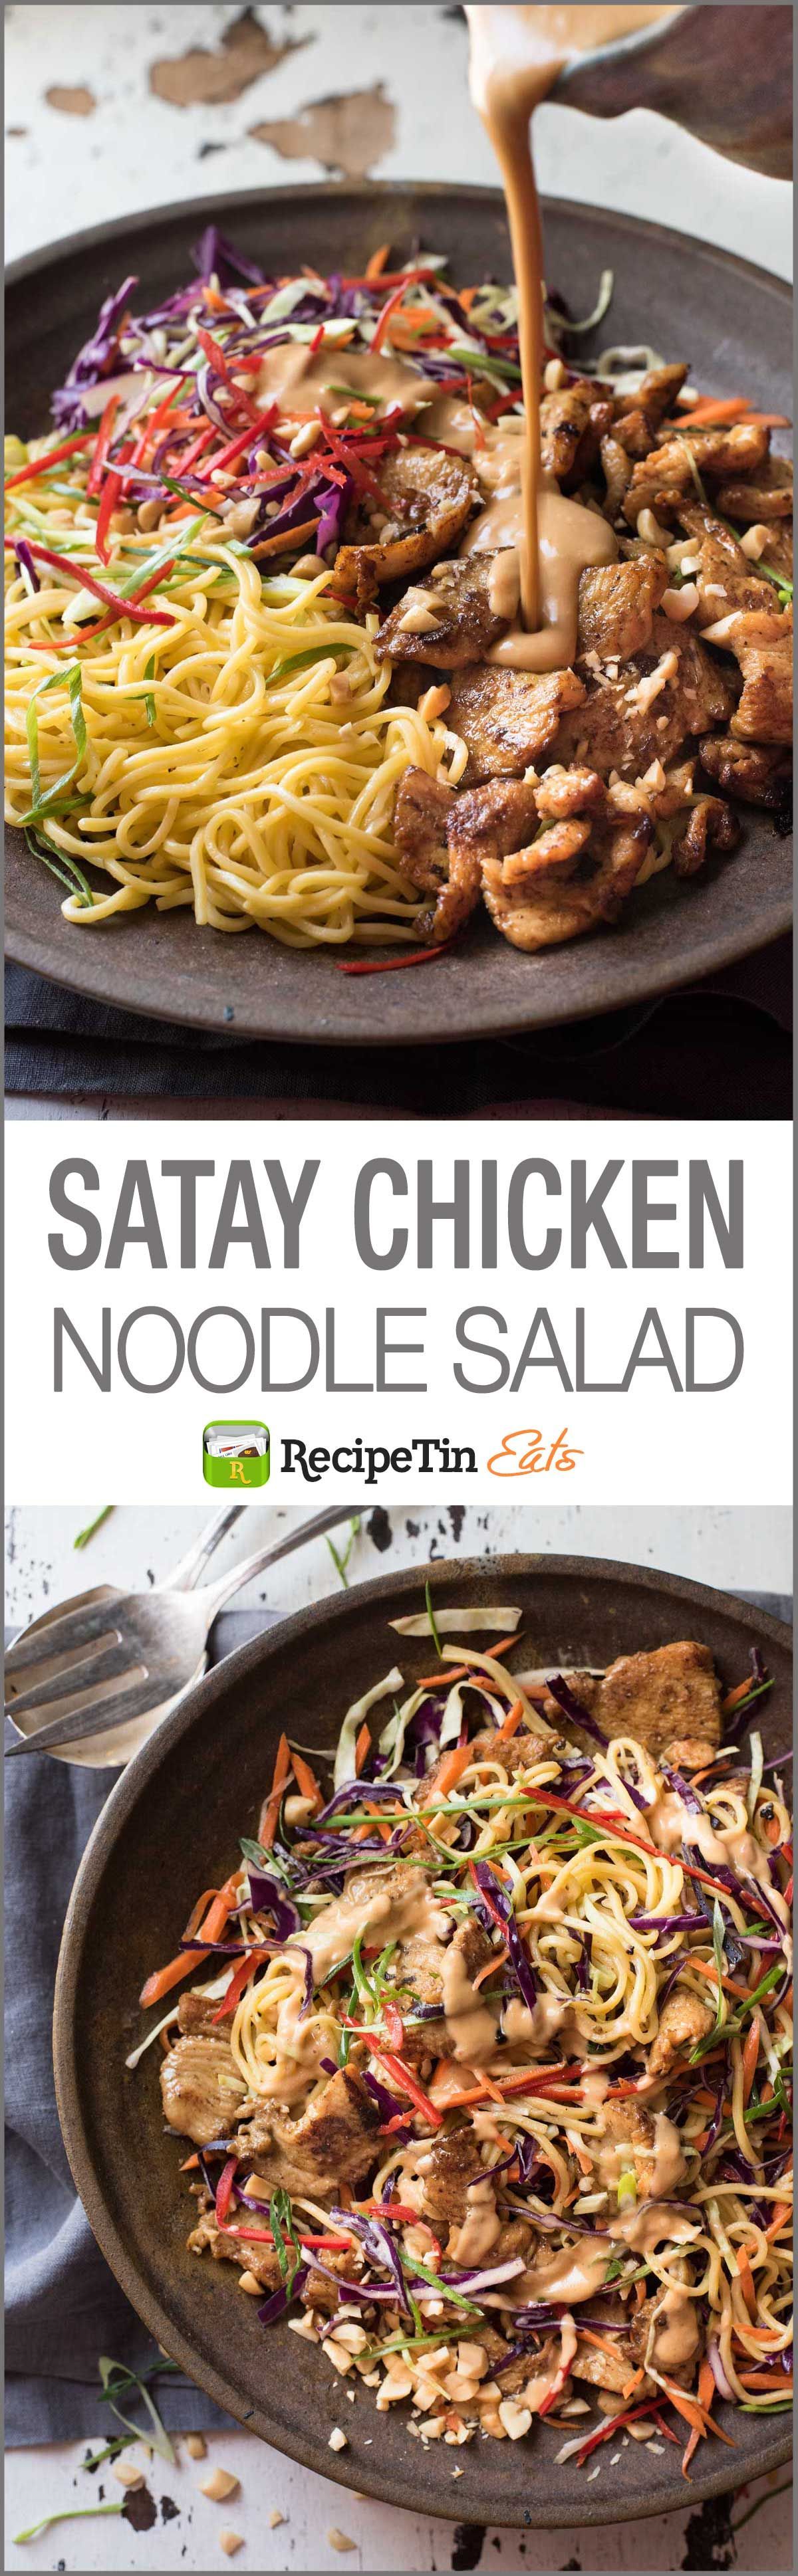 Satay Chicken Noodle Salad – Satay chicken tossed with noodles, veggies and a scrumptious creamy peanut dressing!